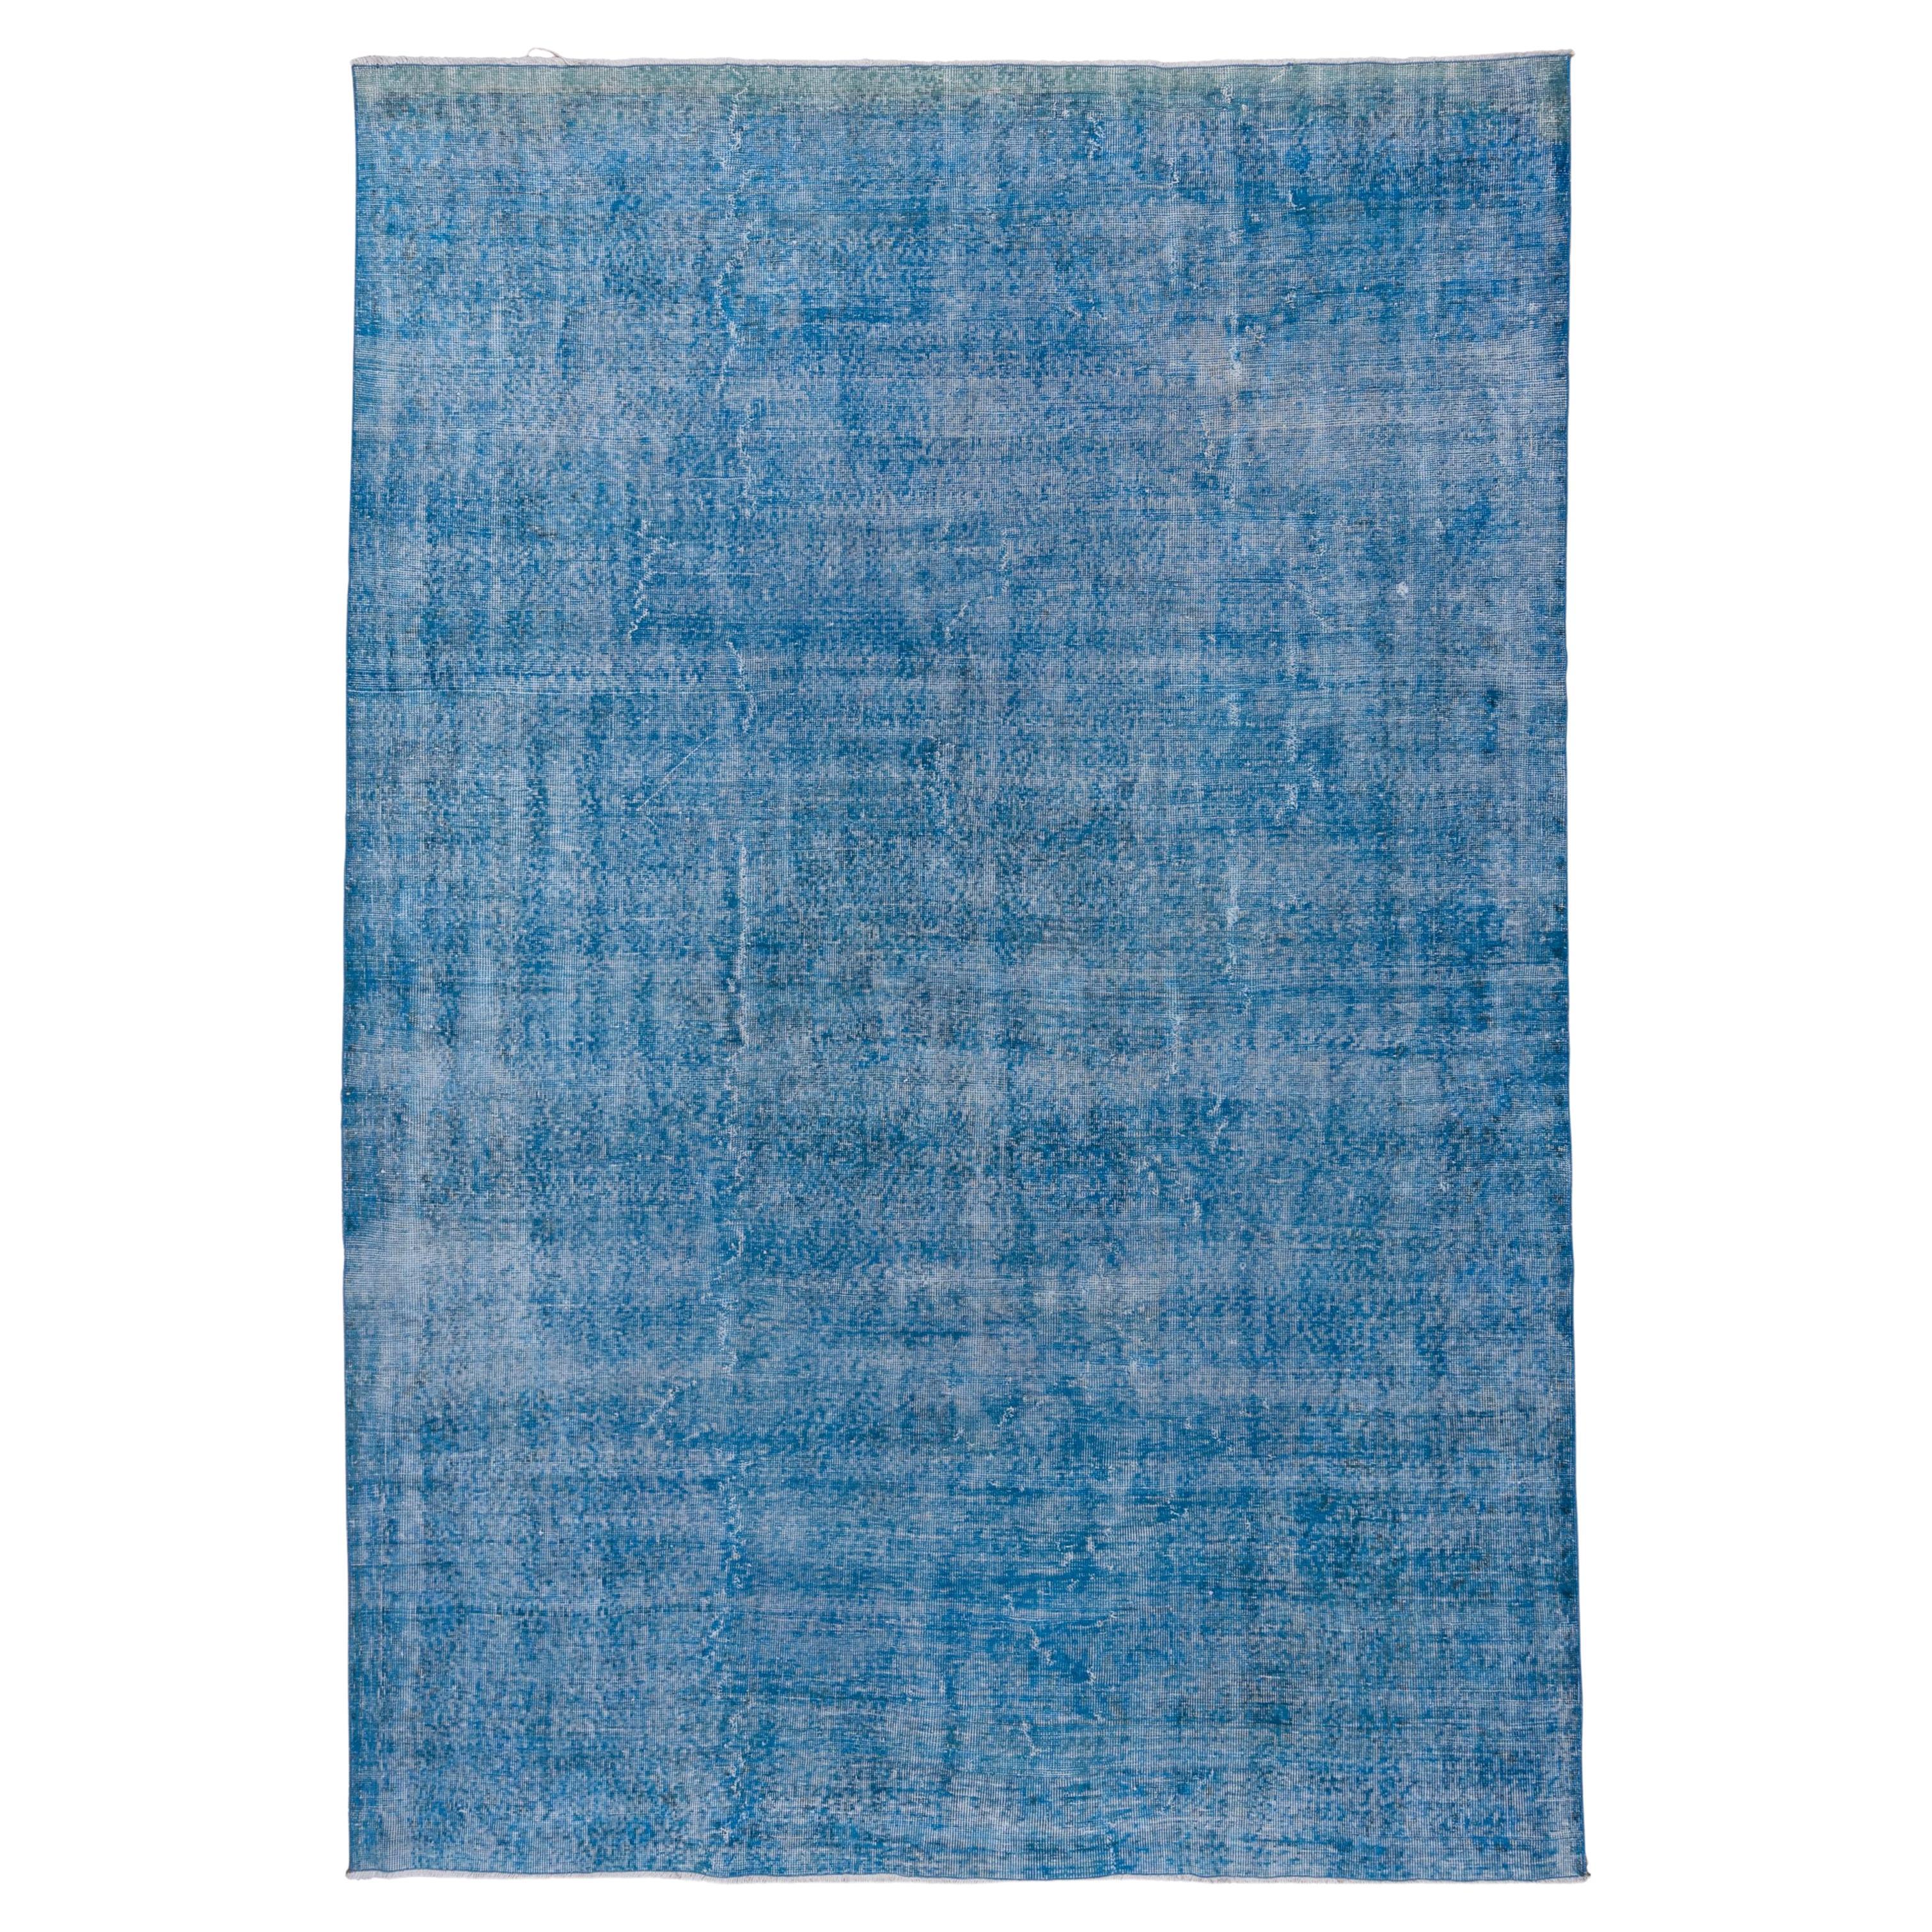 Vintage Blue Overdyed Sparta Wool Rug, Shabby Chic, Bright Blue